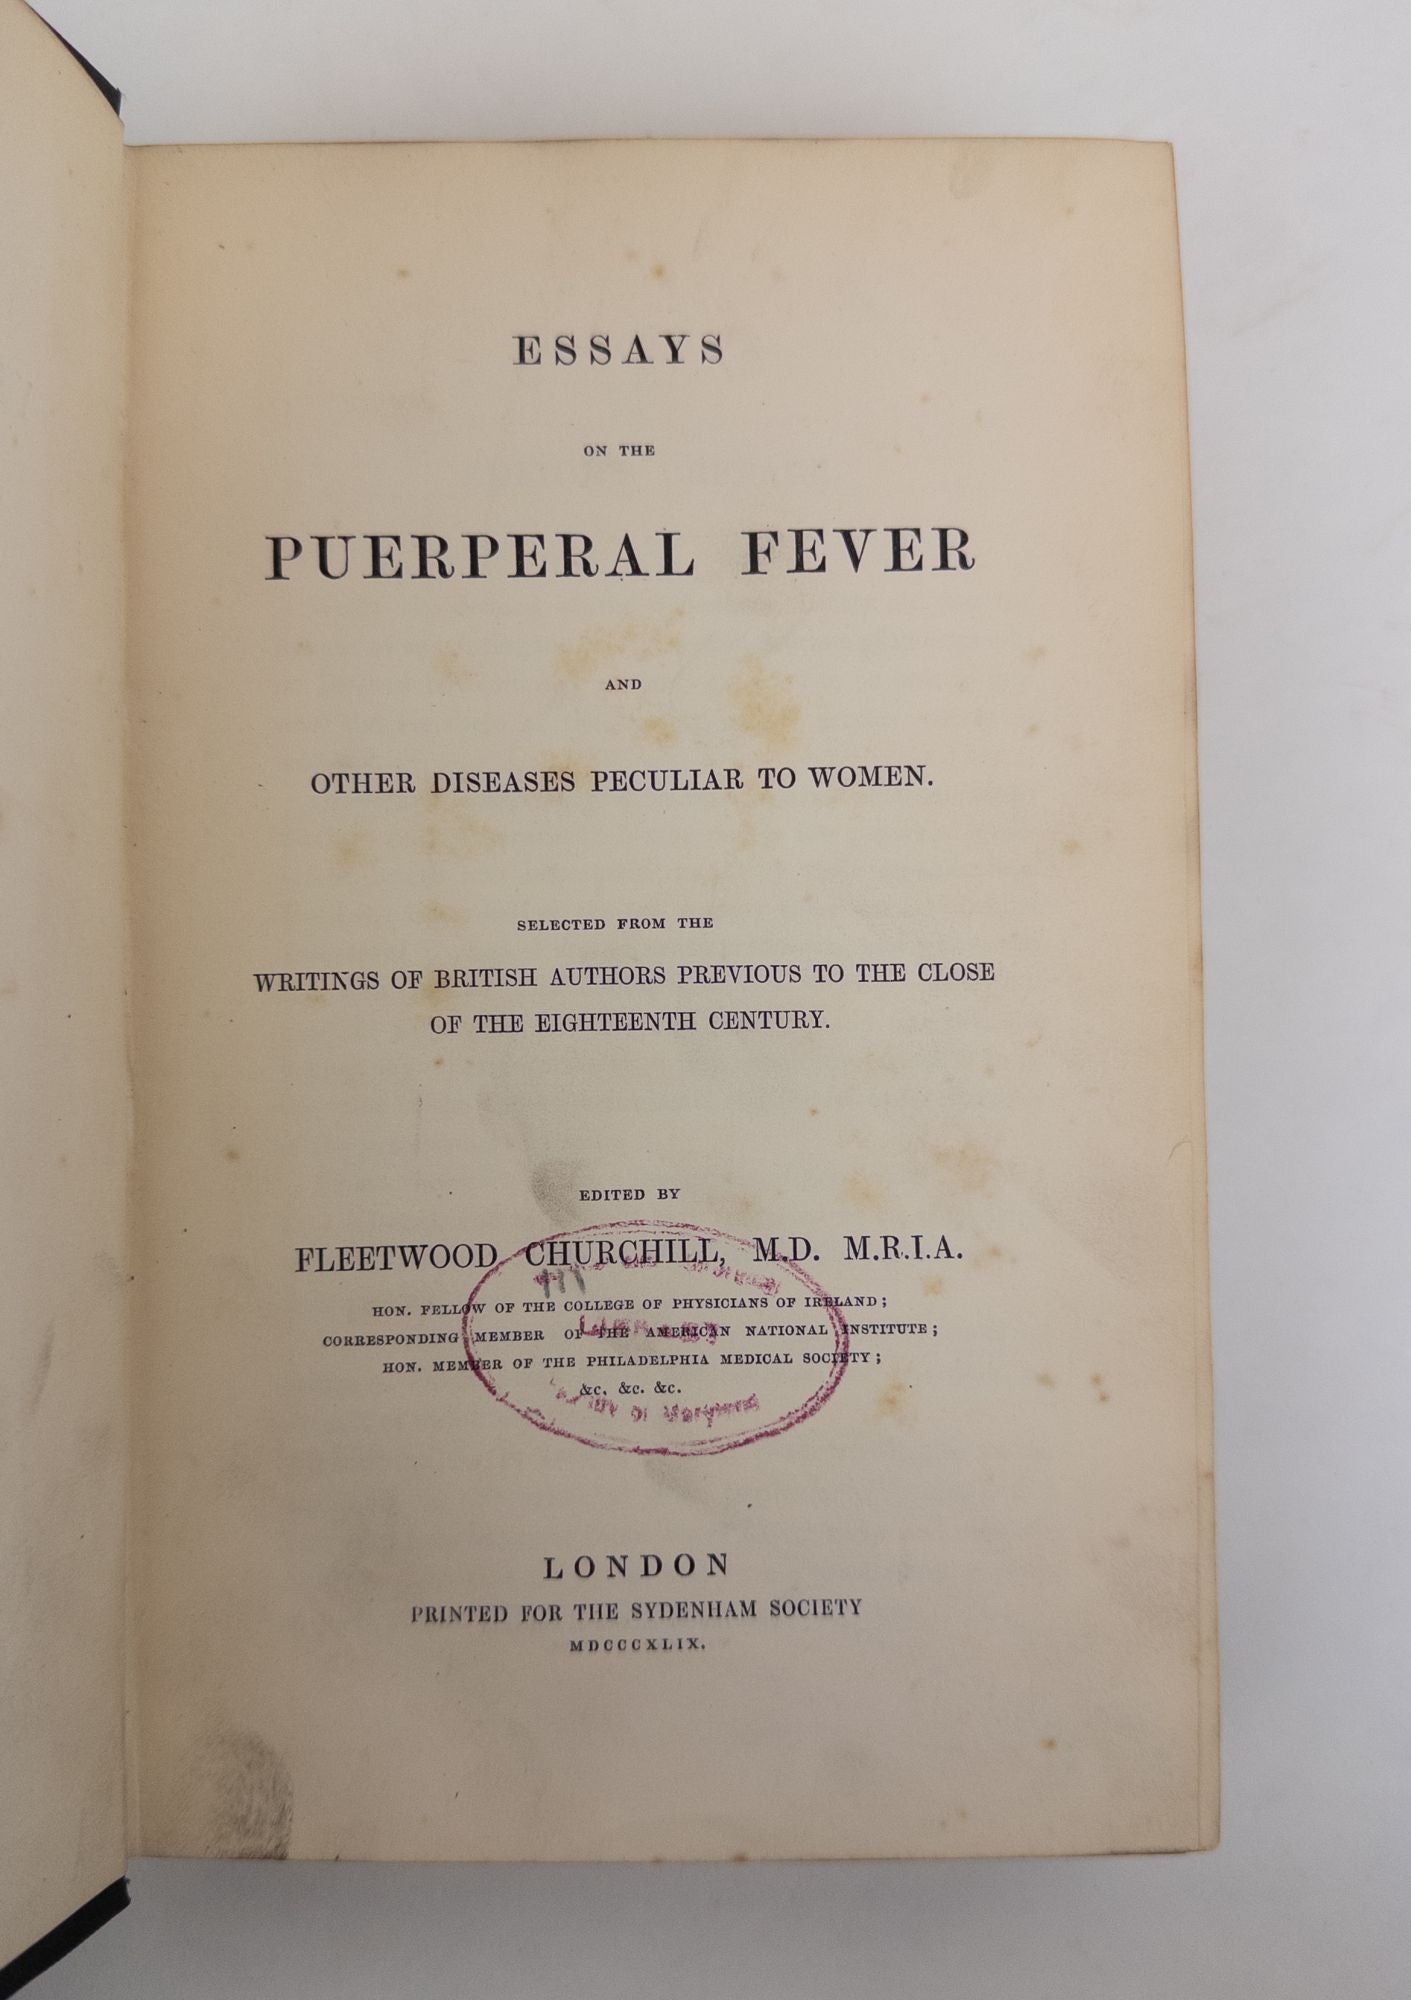 Product Image for ESSAYS ON THE PUERPERAL FEVER AND OTHER DISEASES PECULIAR TO WOMEN [With Signed CDV]